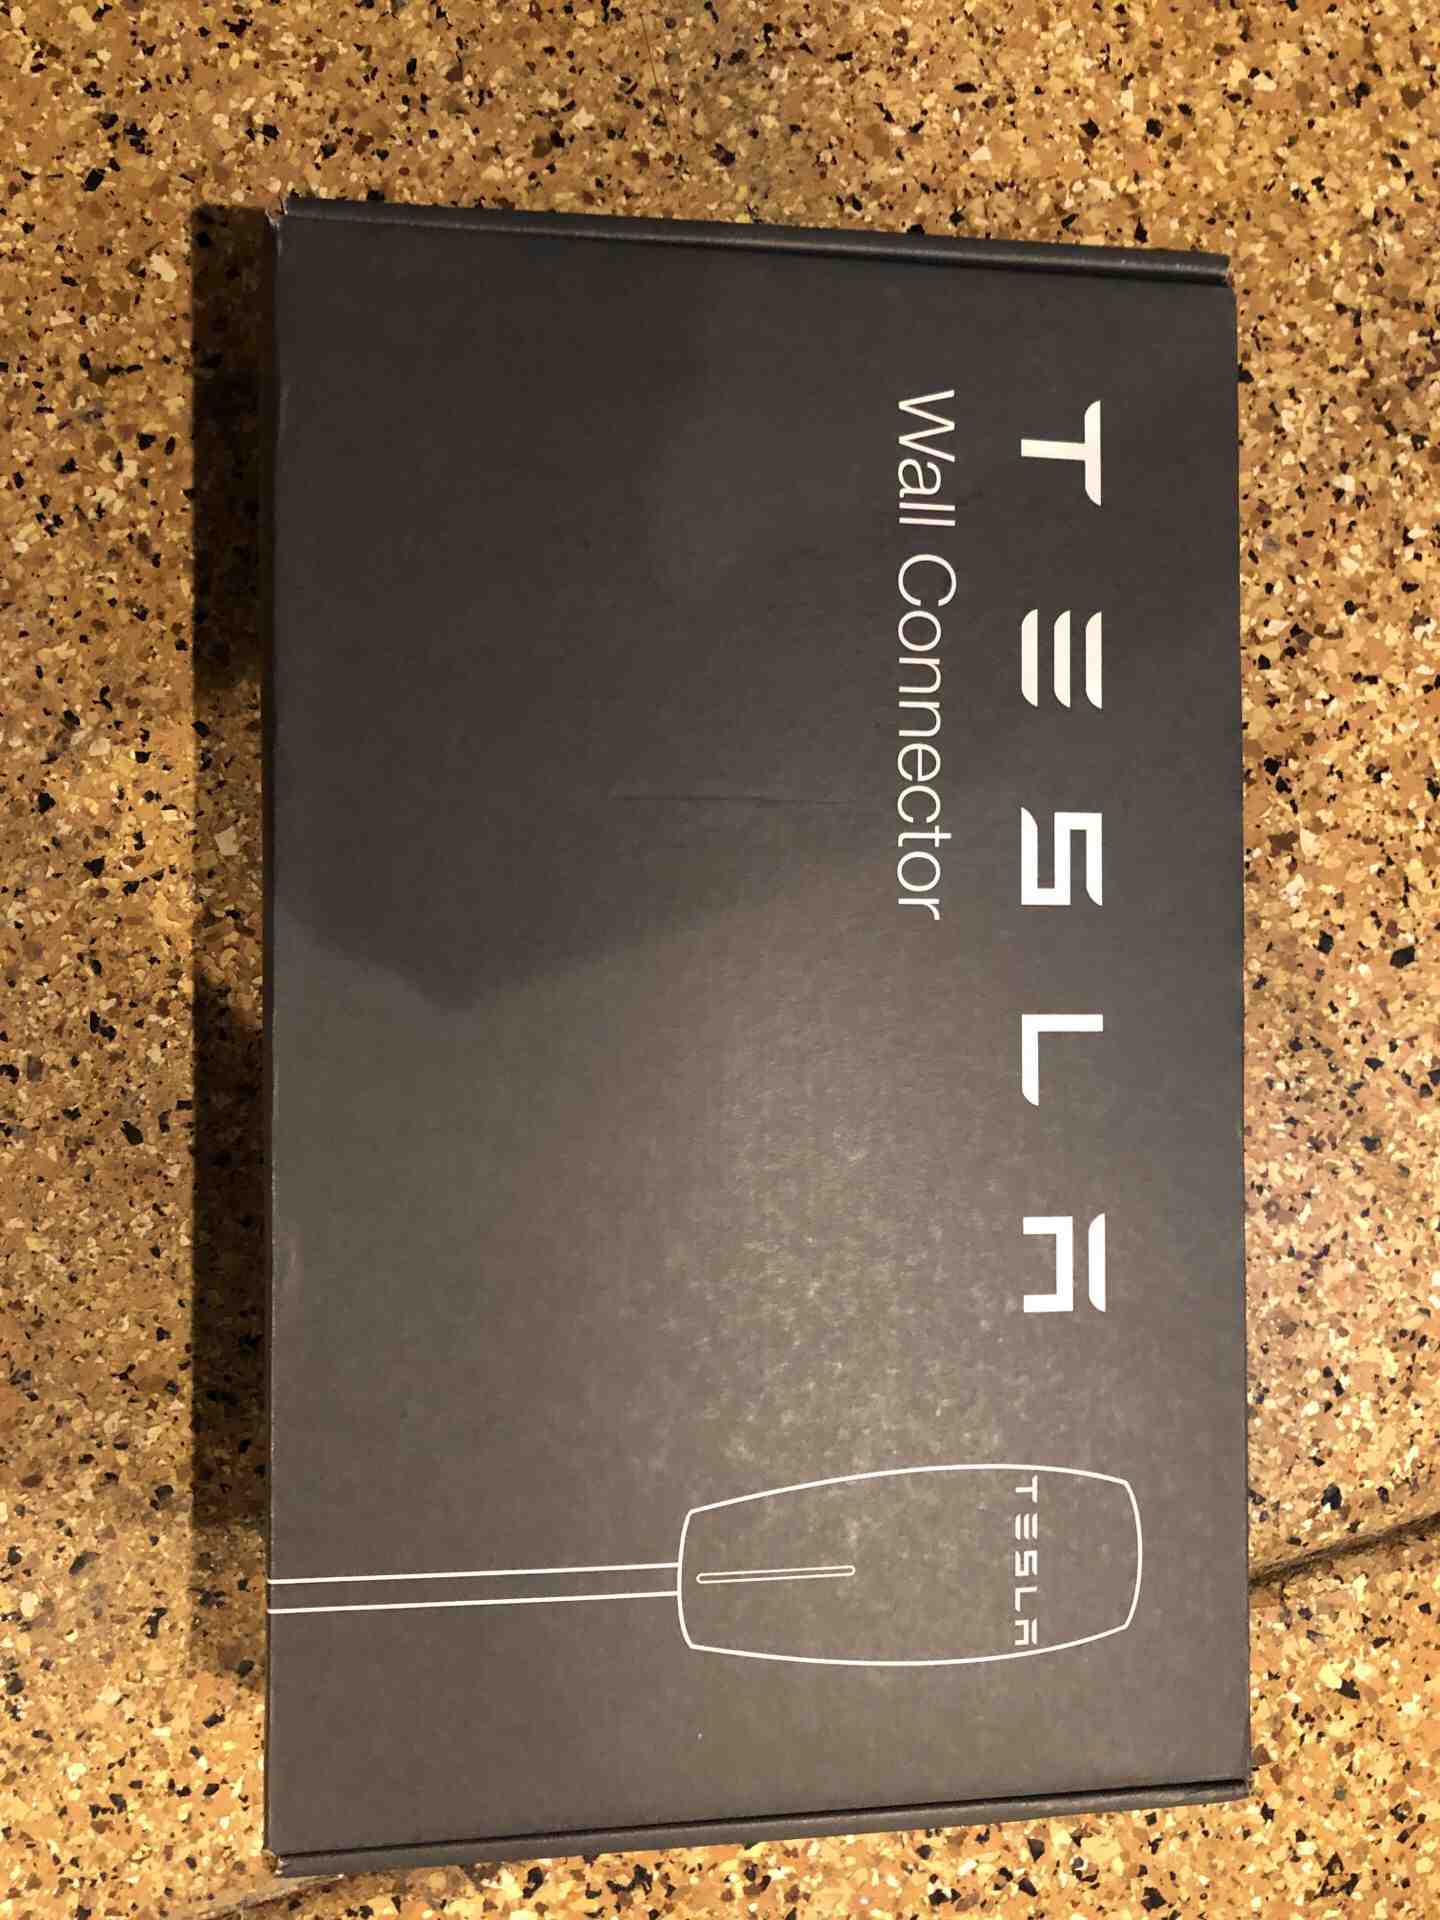 Does Tesla powerwall qualify for tax credit?